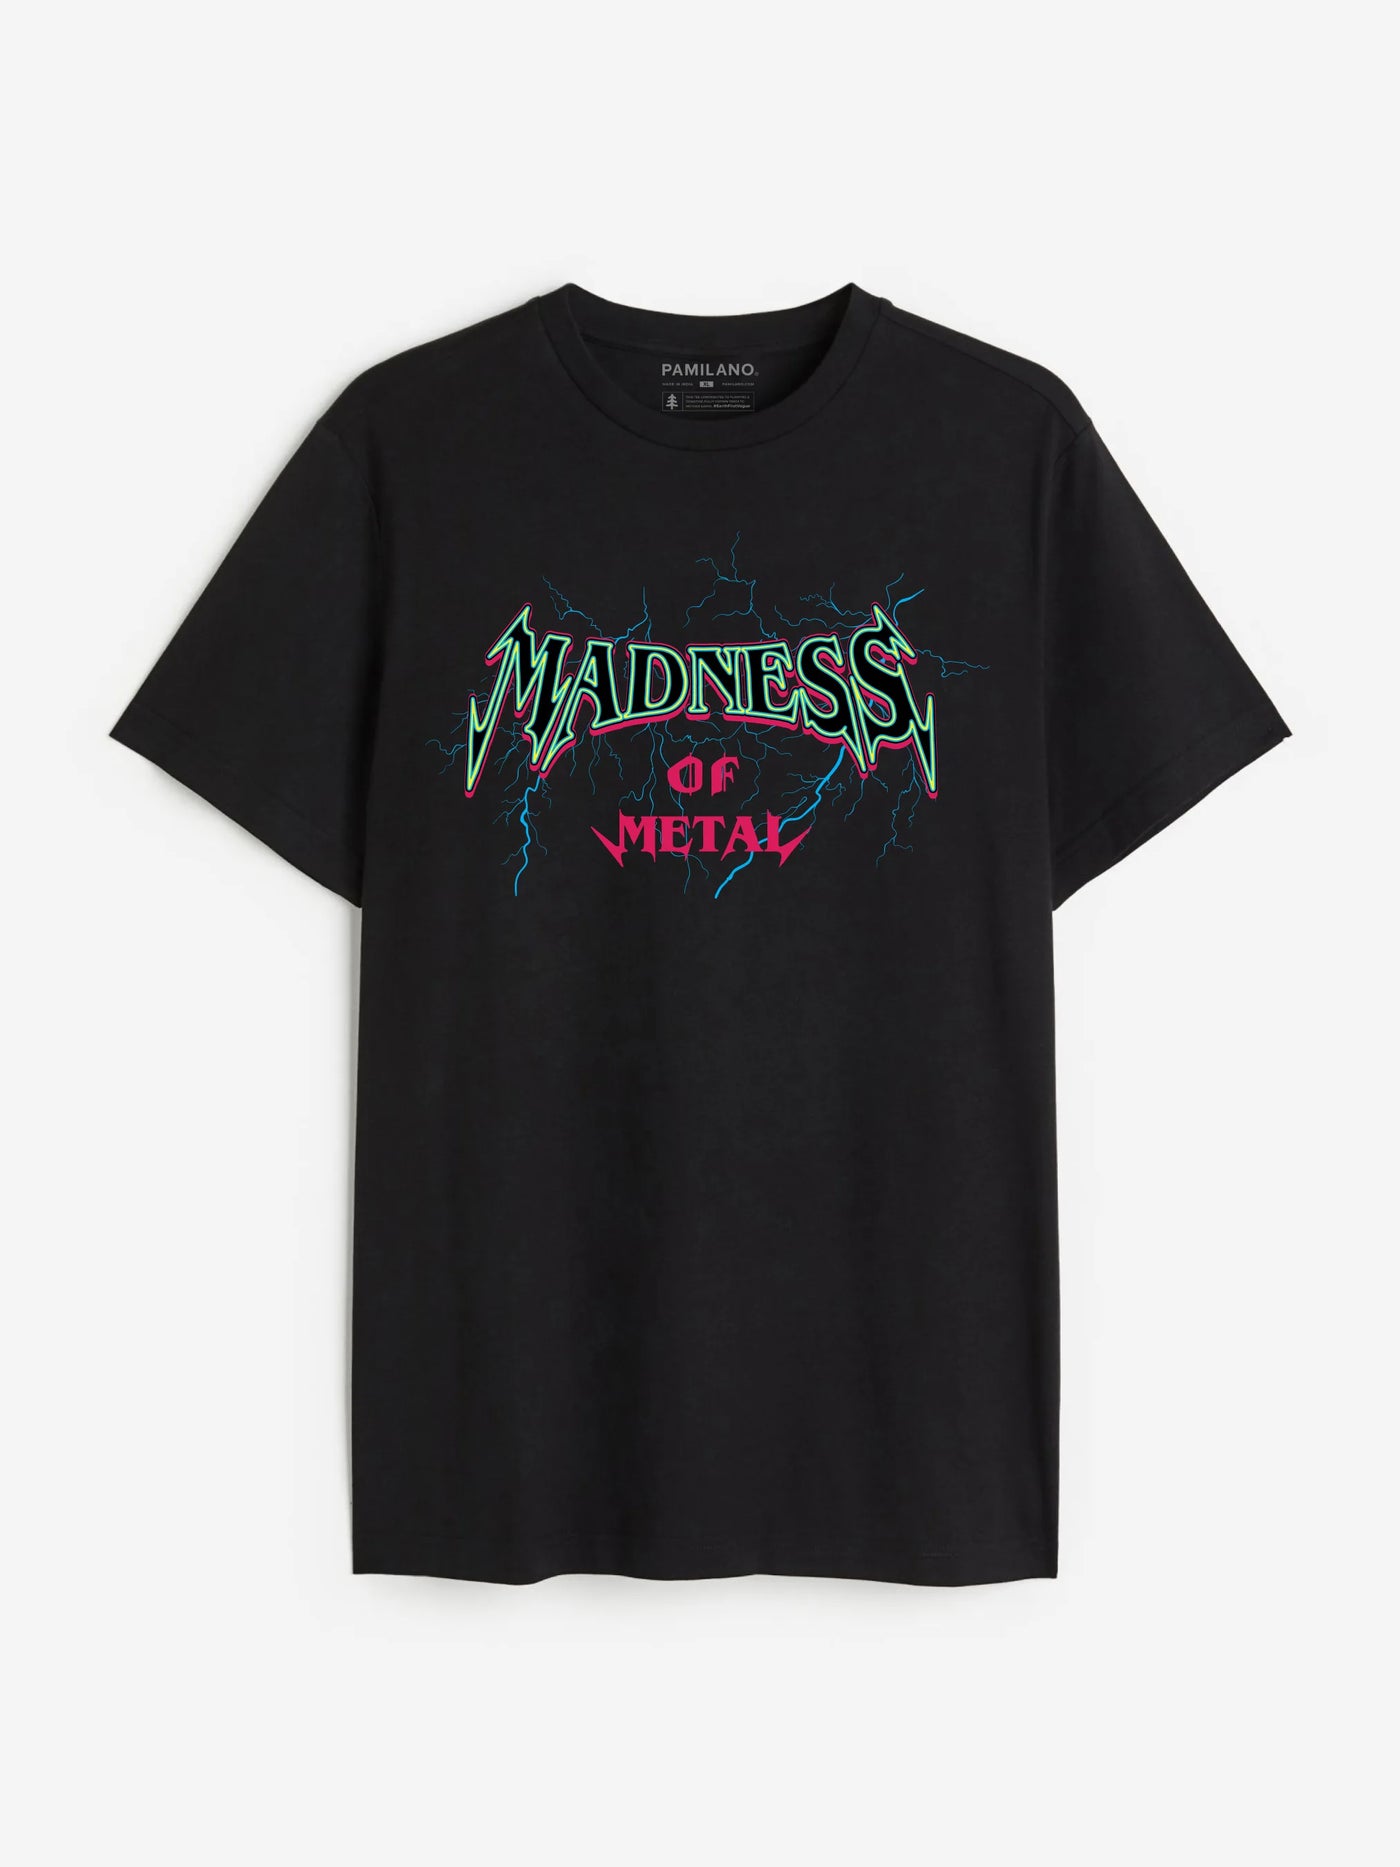 Madness of metal- Unisex T-Shirt